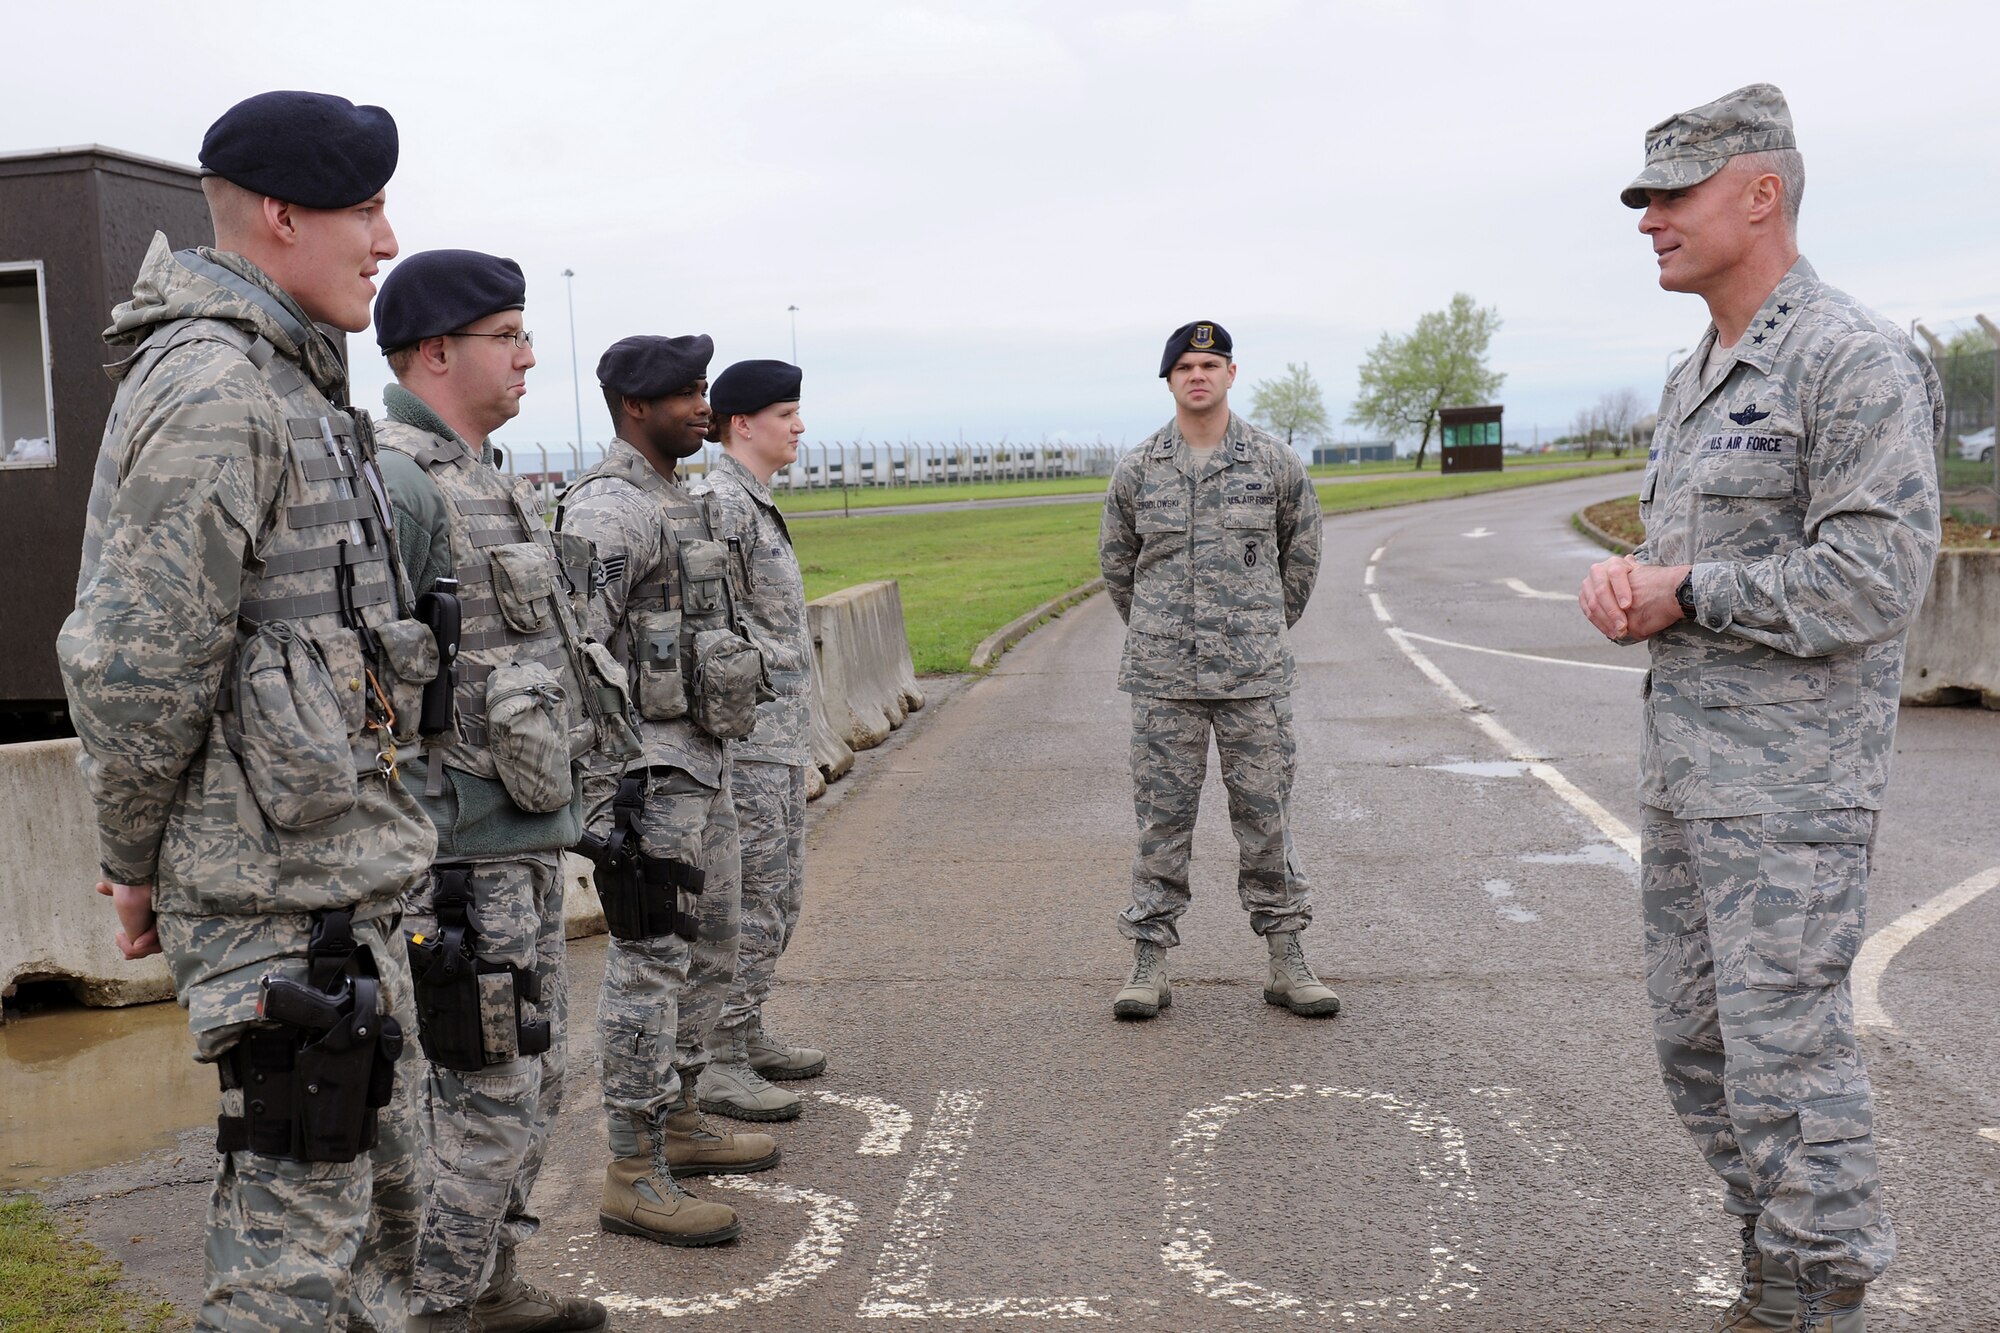 RAF ALCONBURY, England - Airmen assigned to the 423rd Security Forces Squadron brief Lt. Gen. Craig Franklin, 3rd Air Force commander, about the new large vehicle inspection site at RAF Alconbury May 9. The new gate provides a facility to inspect all incoming and outgoing commercial vehicle traffic, while significantly reducing congestion at the main gate. (U.S. Air Force photo by Senior Airman Joel Mease)